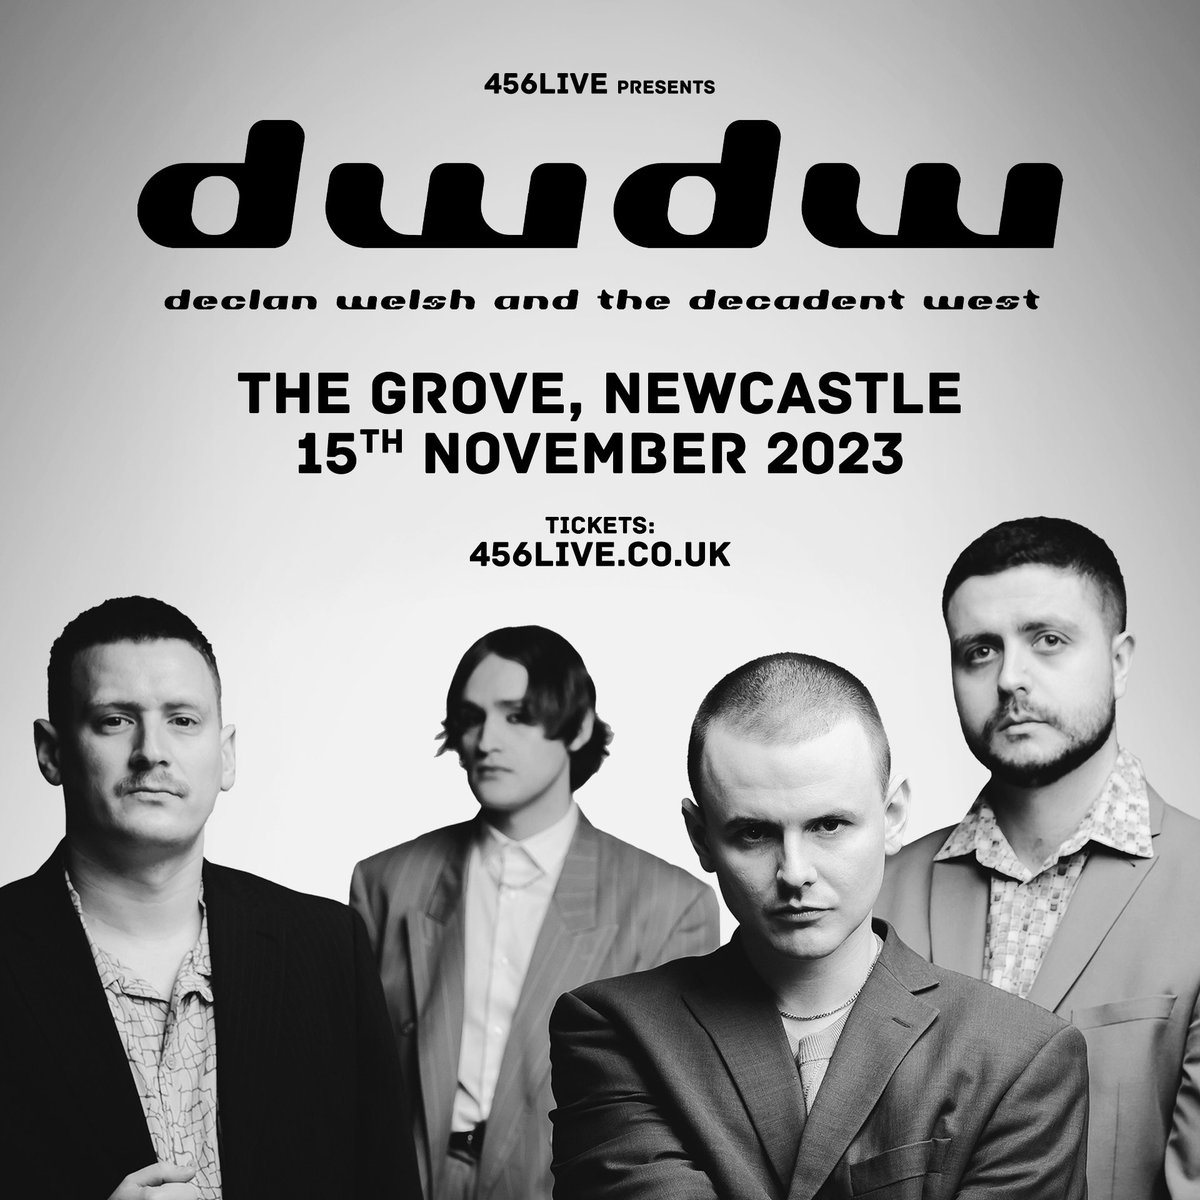 Newcastle! Tonight we play The Grove with @thefamilyrain - Doors 730, FR - 8 DWDW - 9 ! 

Limited tix on the door available! X